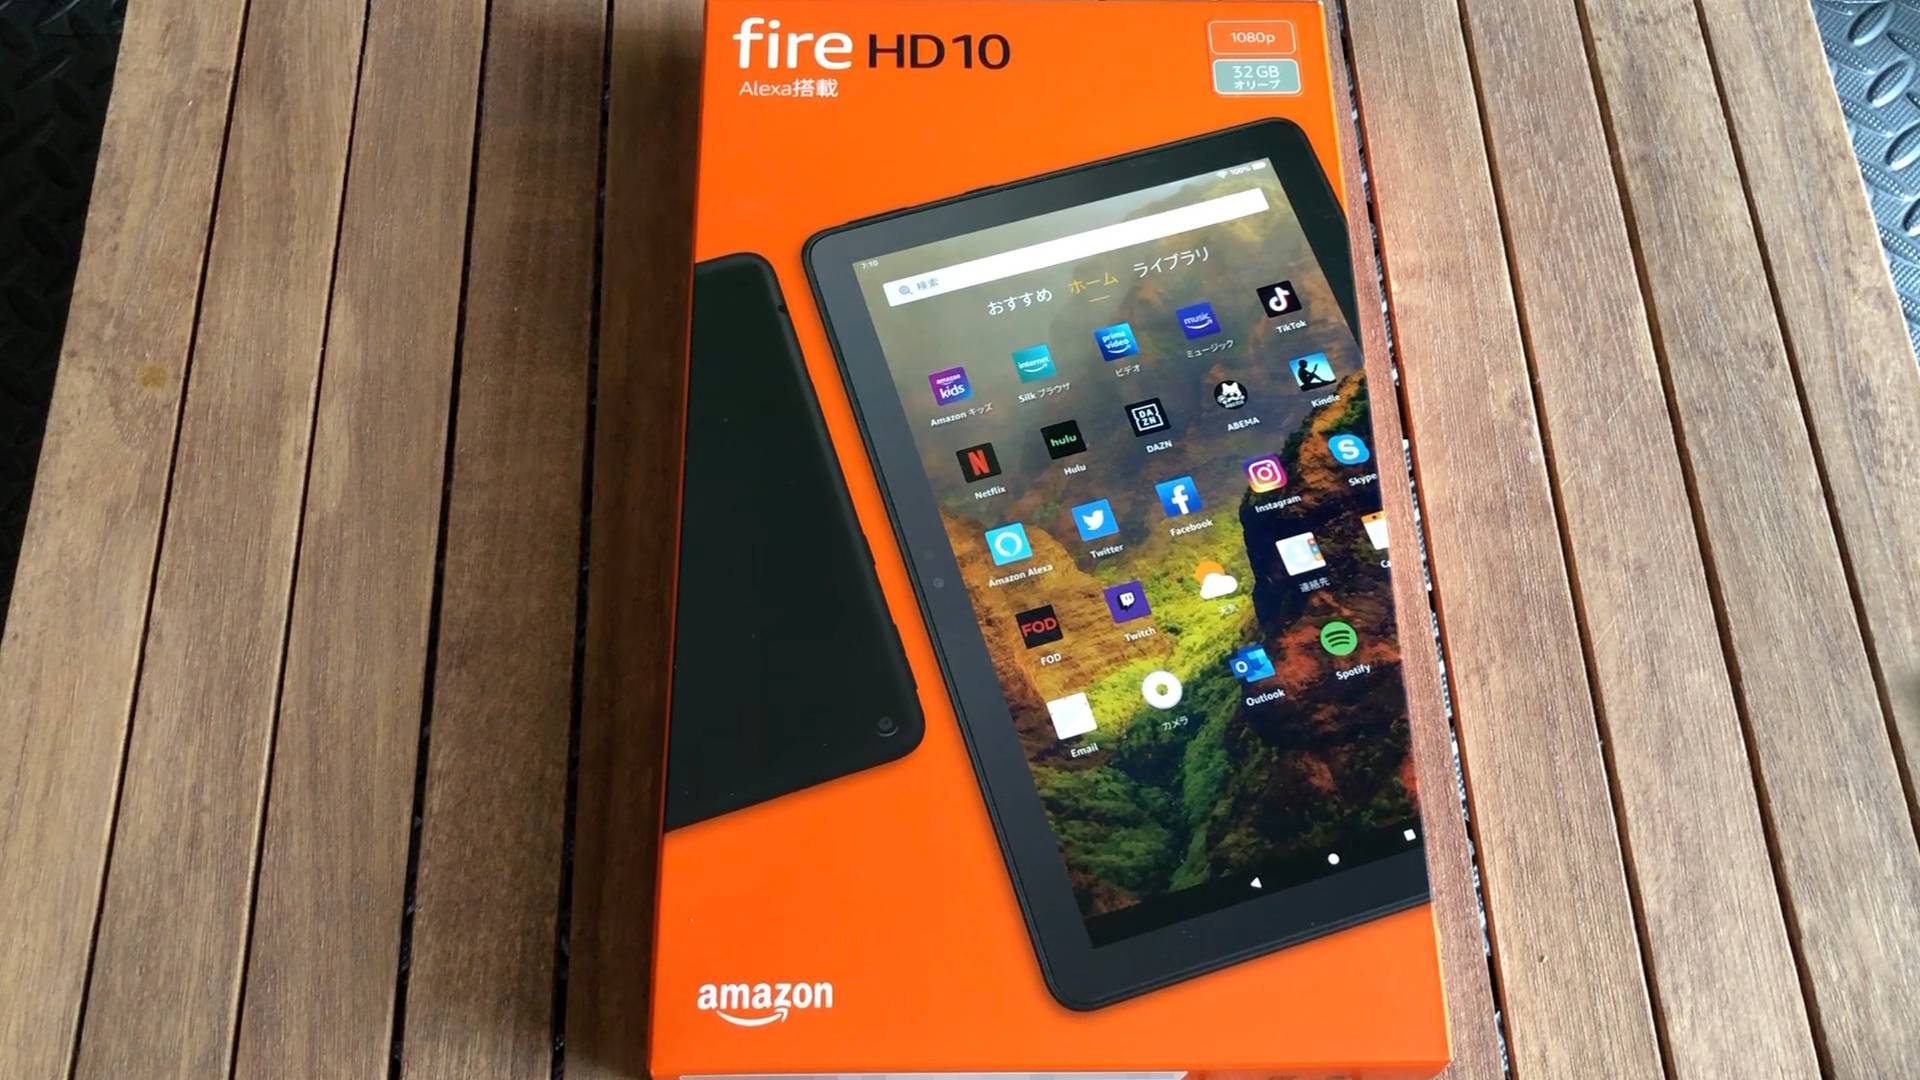 【Daily Life】Fire HD 8タブレット・Fire HD 10タブレット